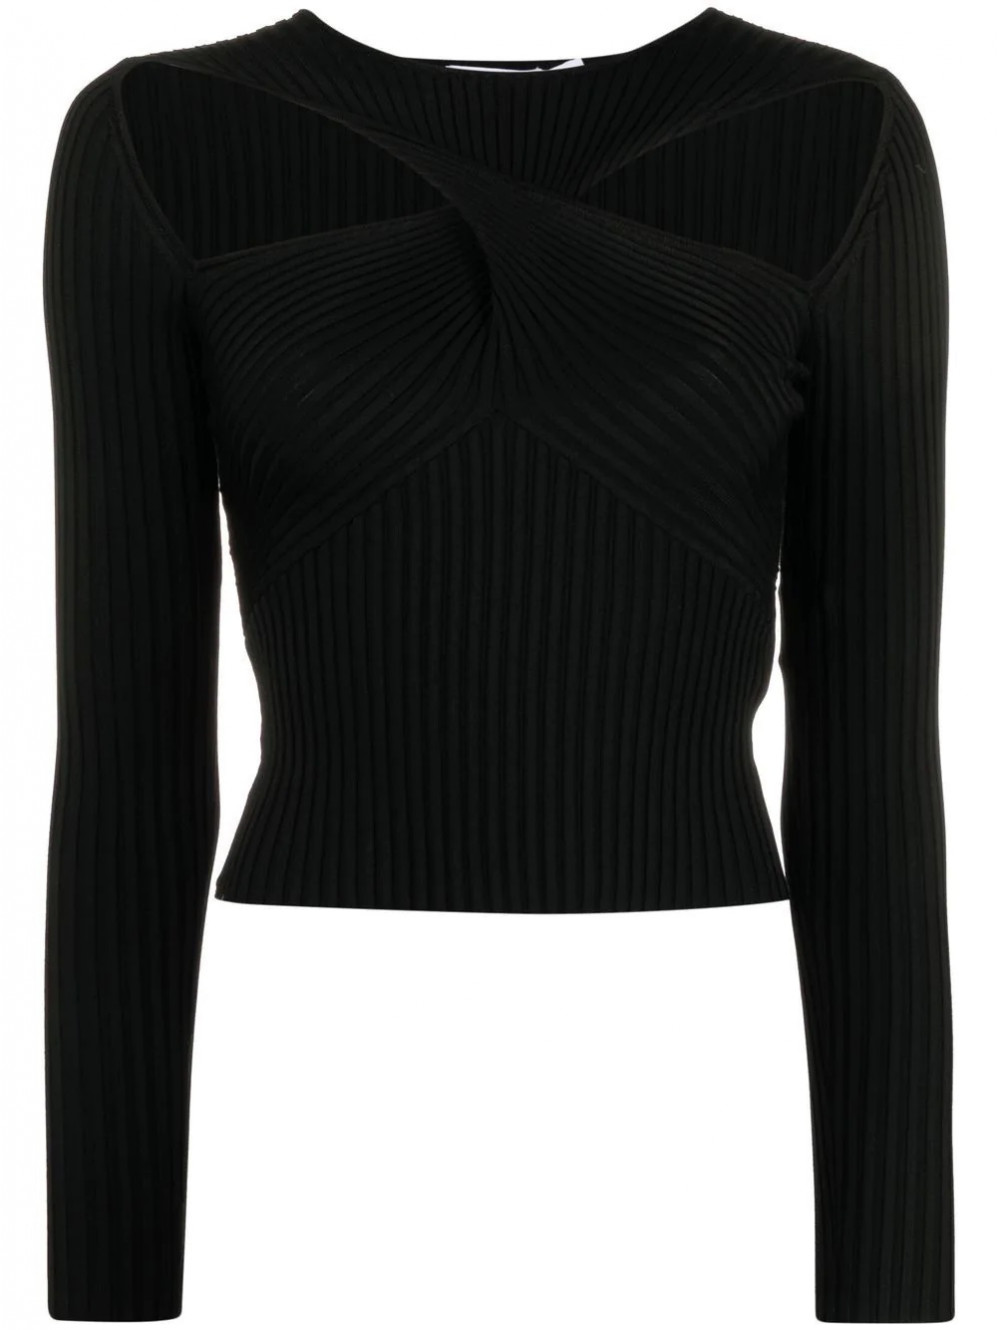 Black ribbed knit cut out top